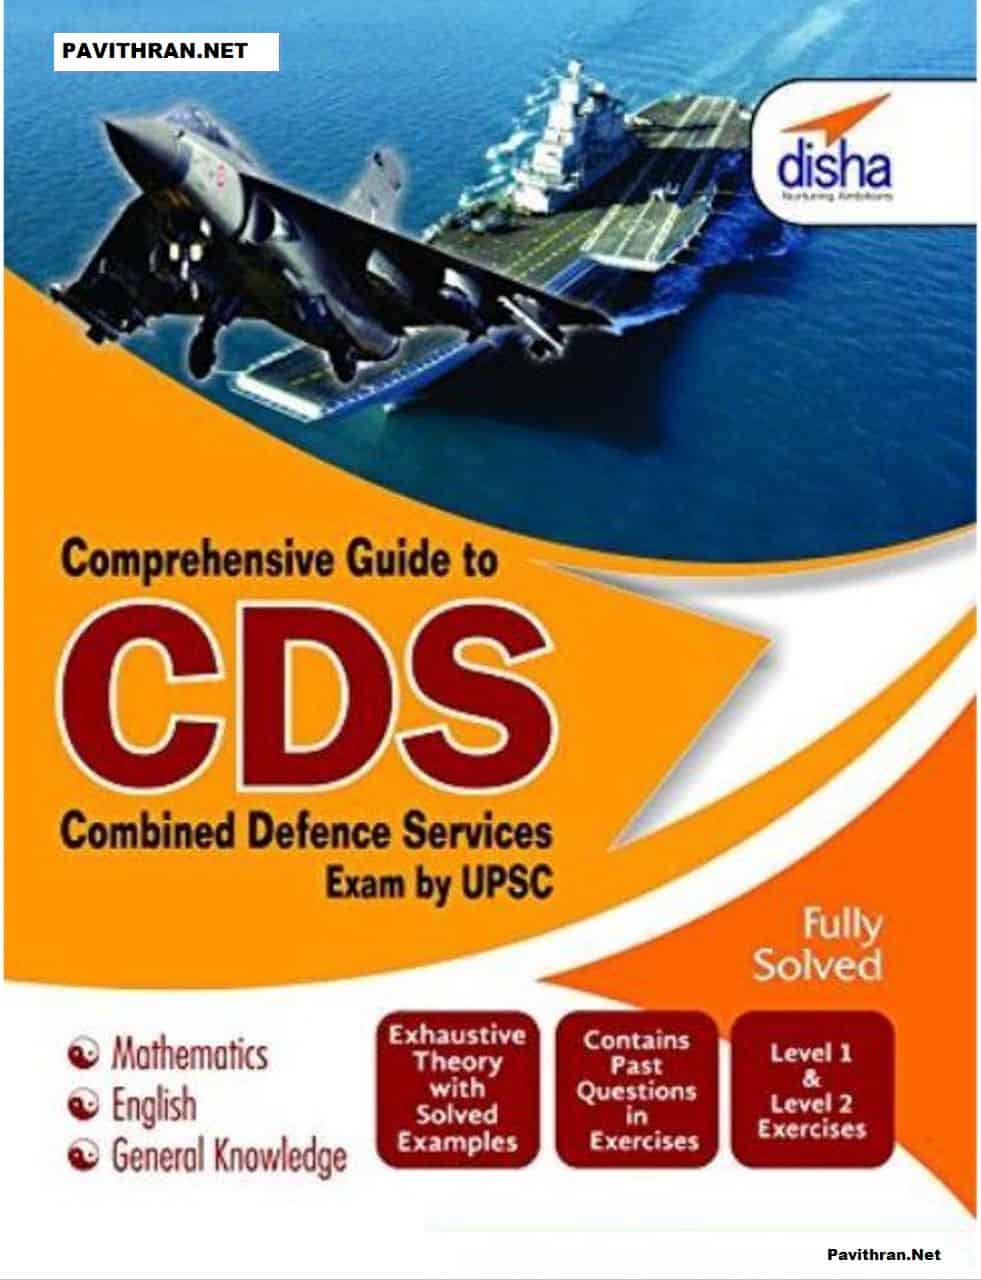 Disha CDS Previous Year Solved Papers PDF